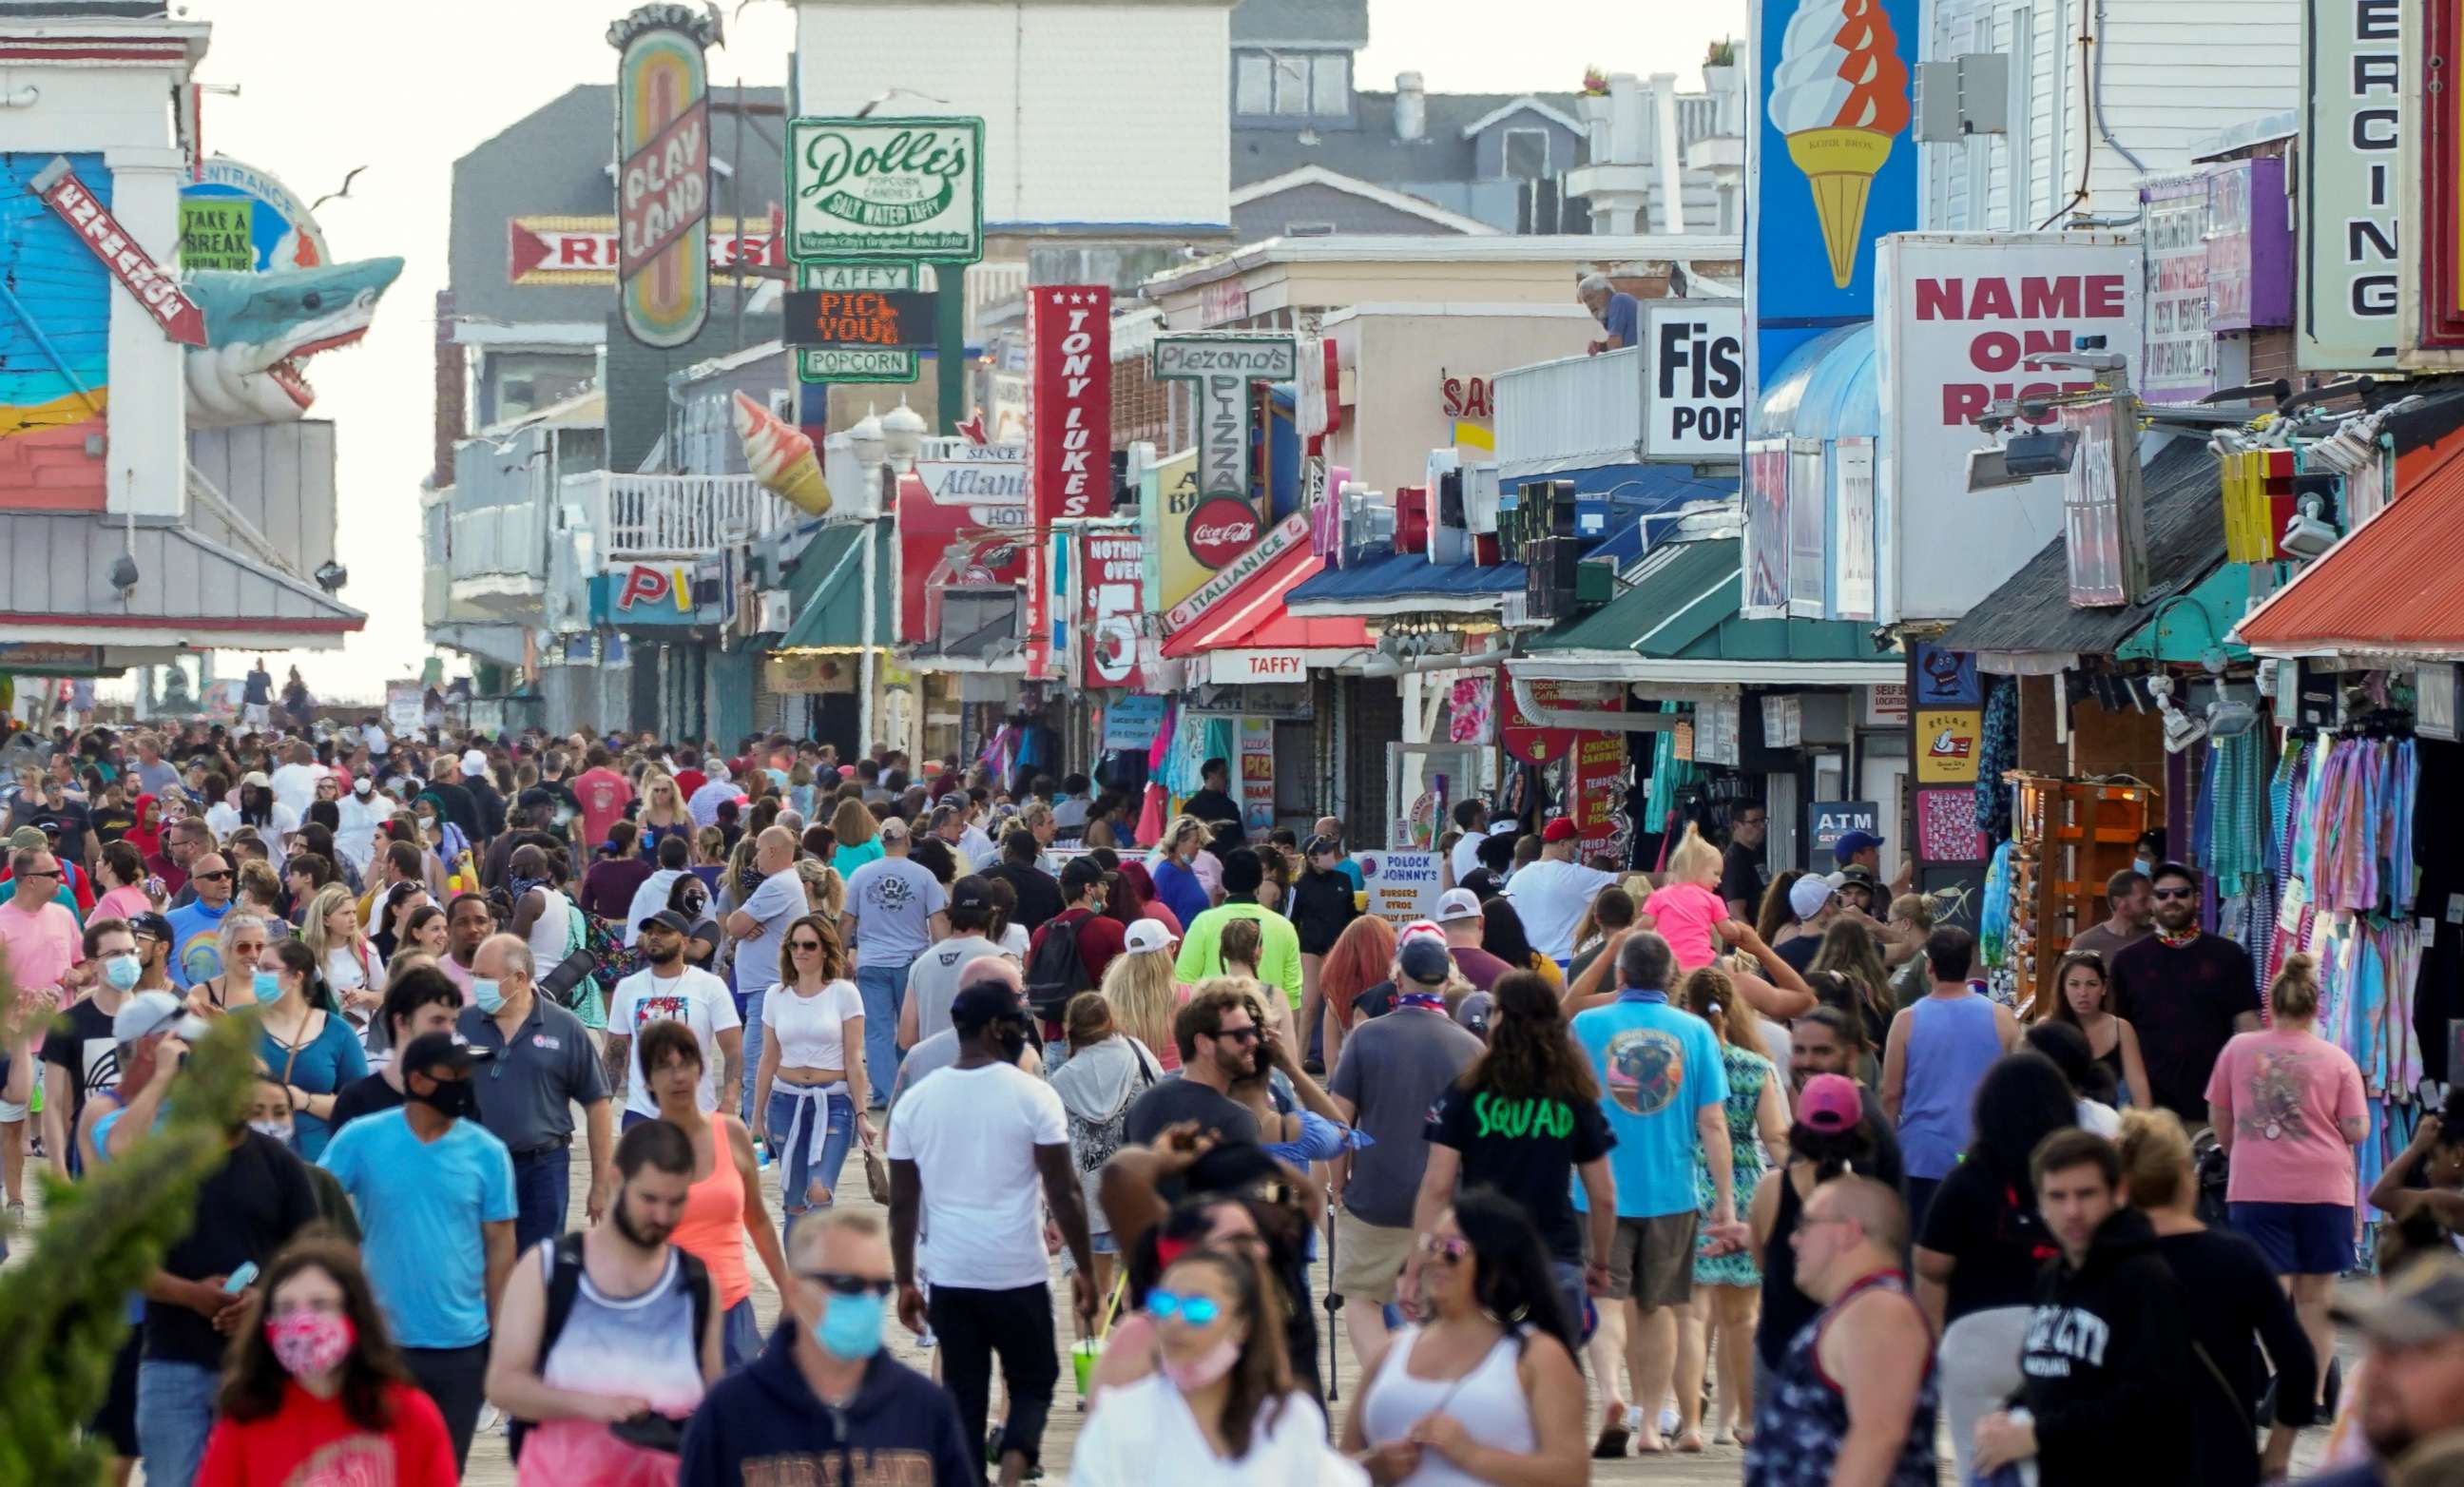 PHOTO: With the relaxing of the coronavirus disease (COVID-19) restrictions, visitors crowd the boardwalk on Memorial Day weekend in Ocean City, Maryland, May 23, 2020.